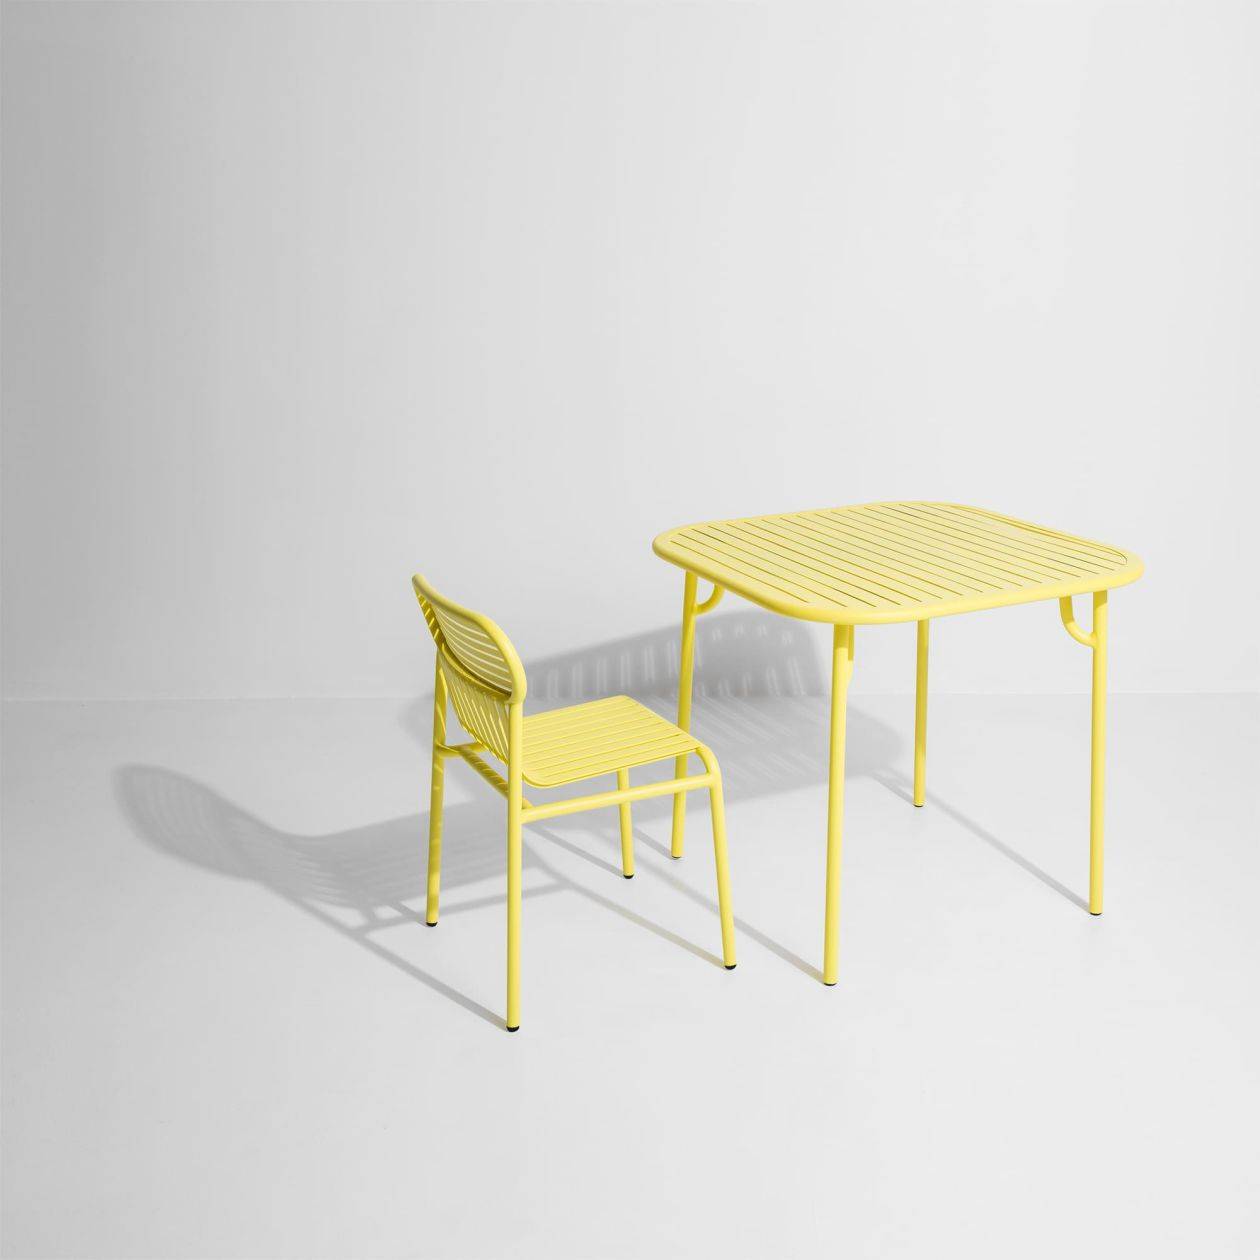 Week-End Square Dining Table with slats - Yellow